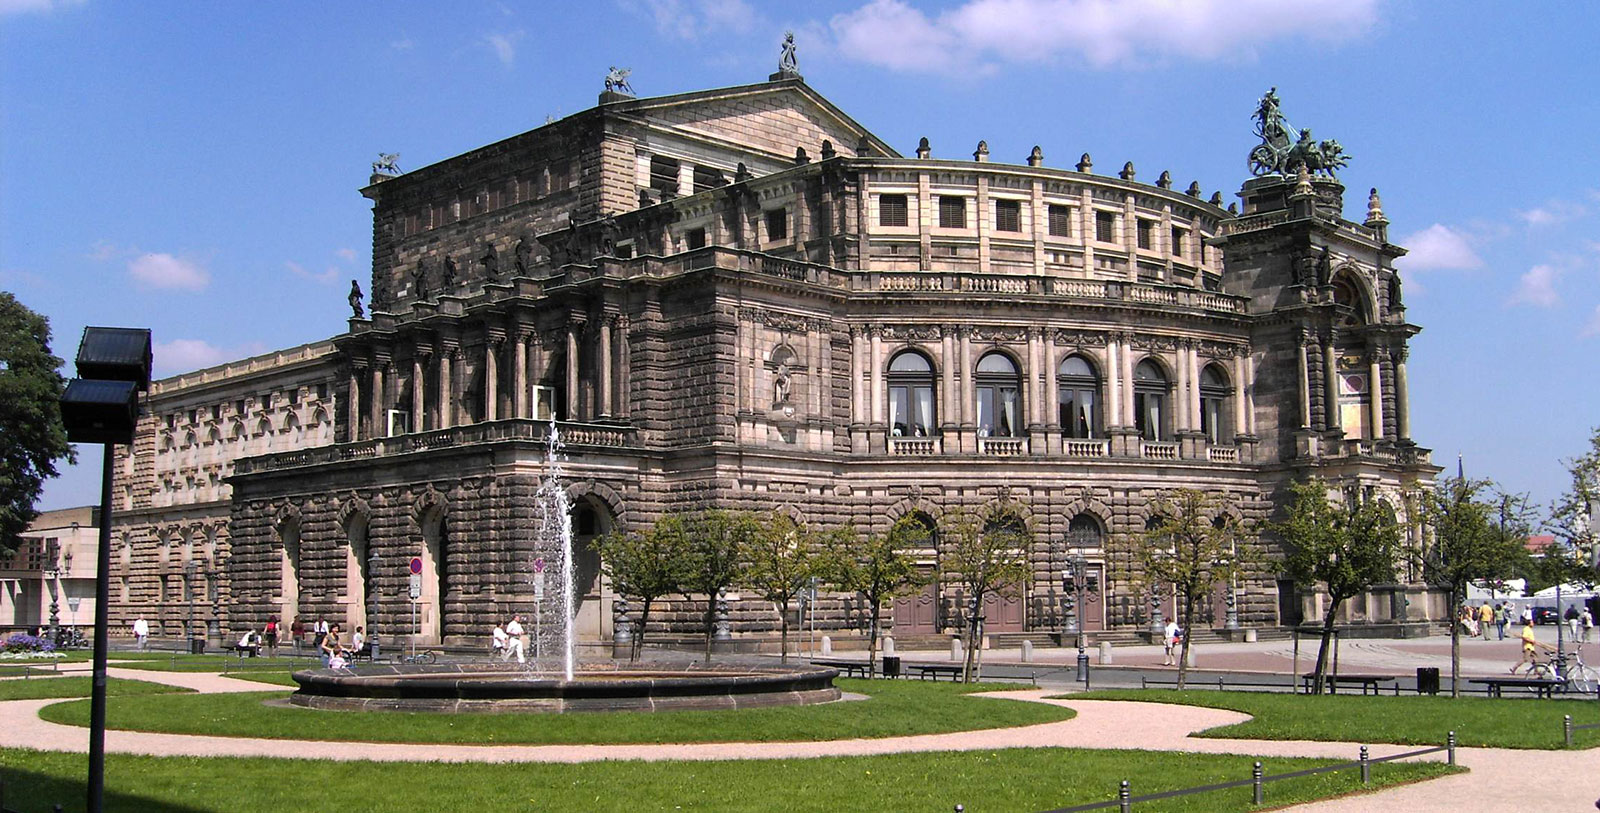 Experience a thrilling theatrical performance at the Semper Opera Dresden.